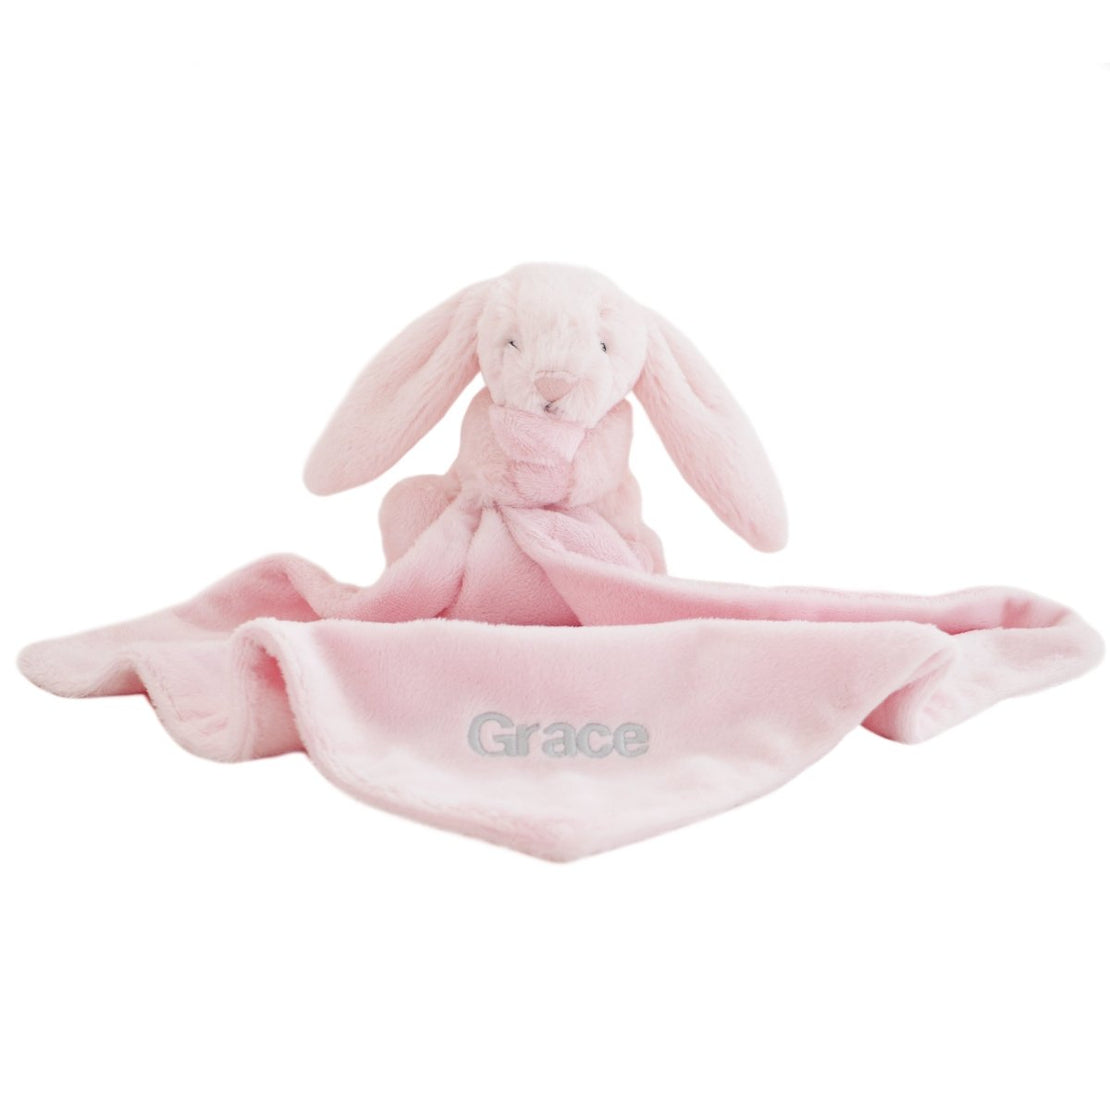 Personalised Bunny Comforter - Pink - LOVINGLY SIGNED (HK)